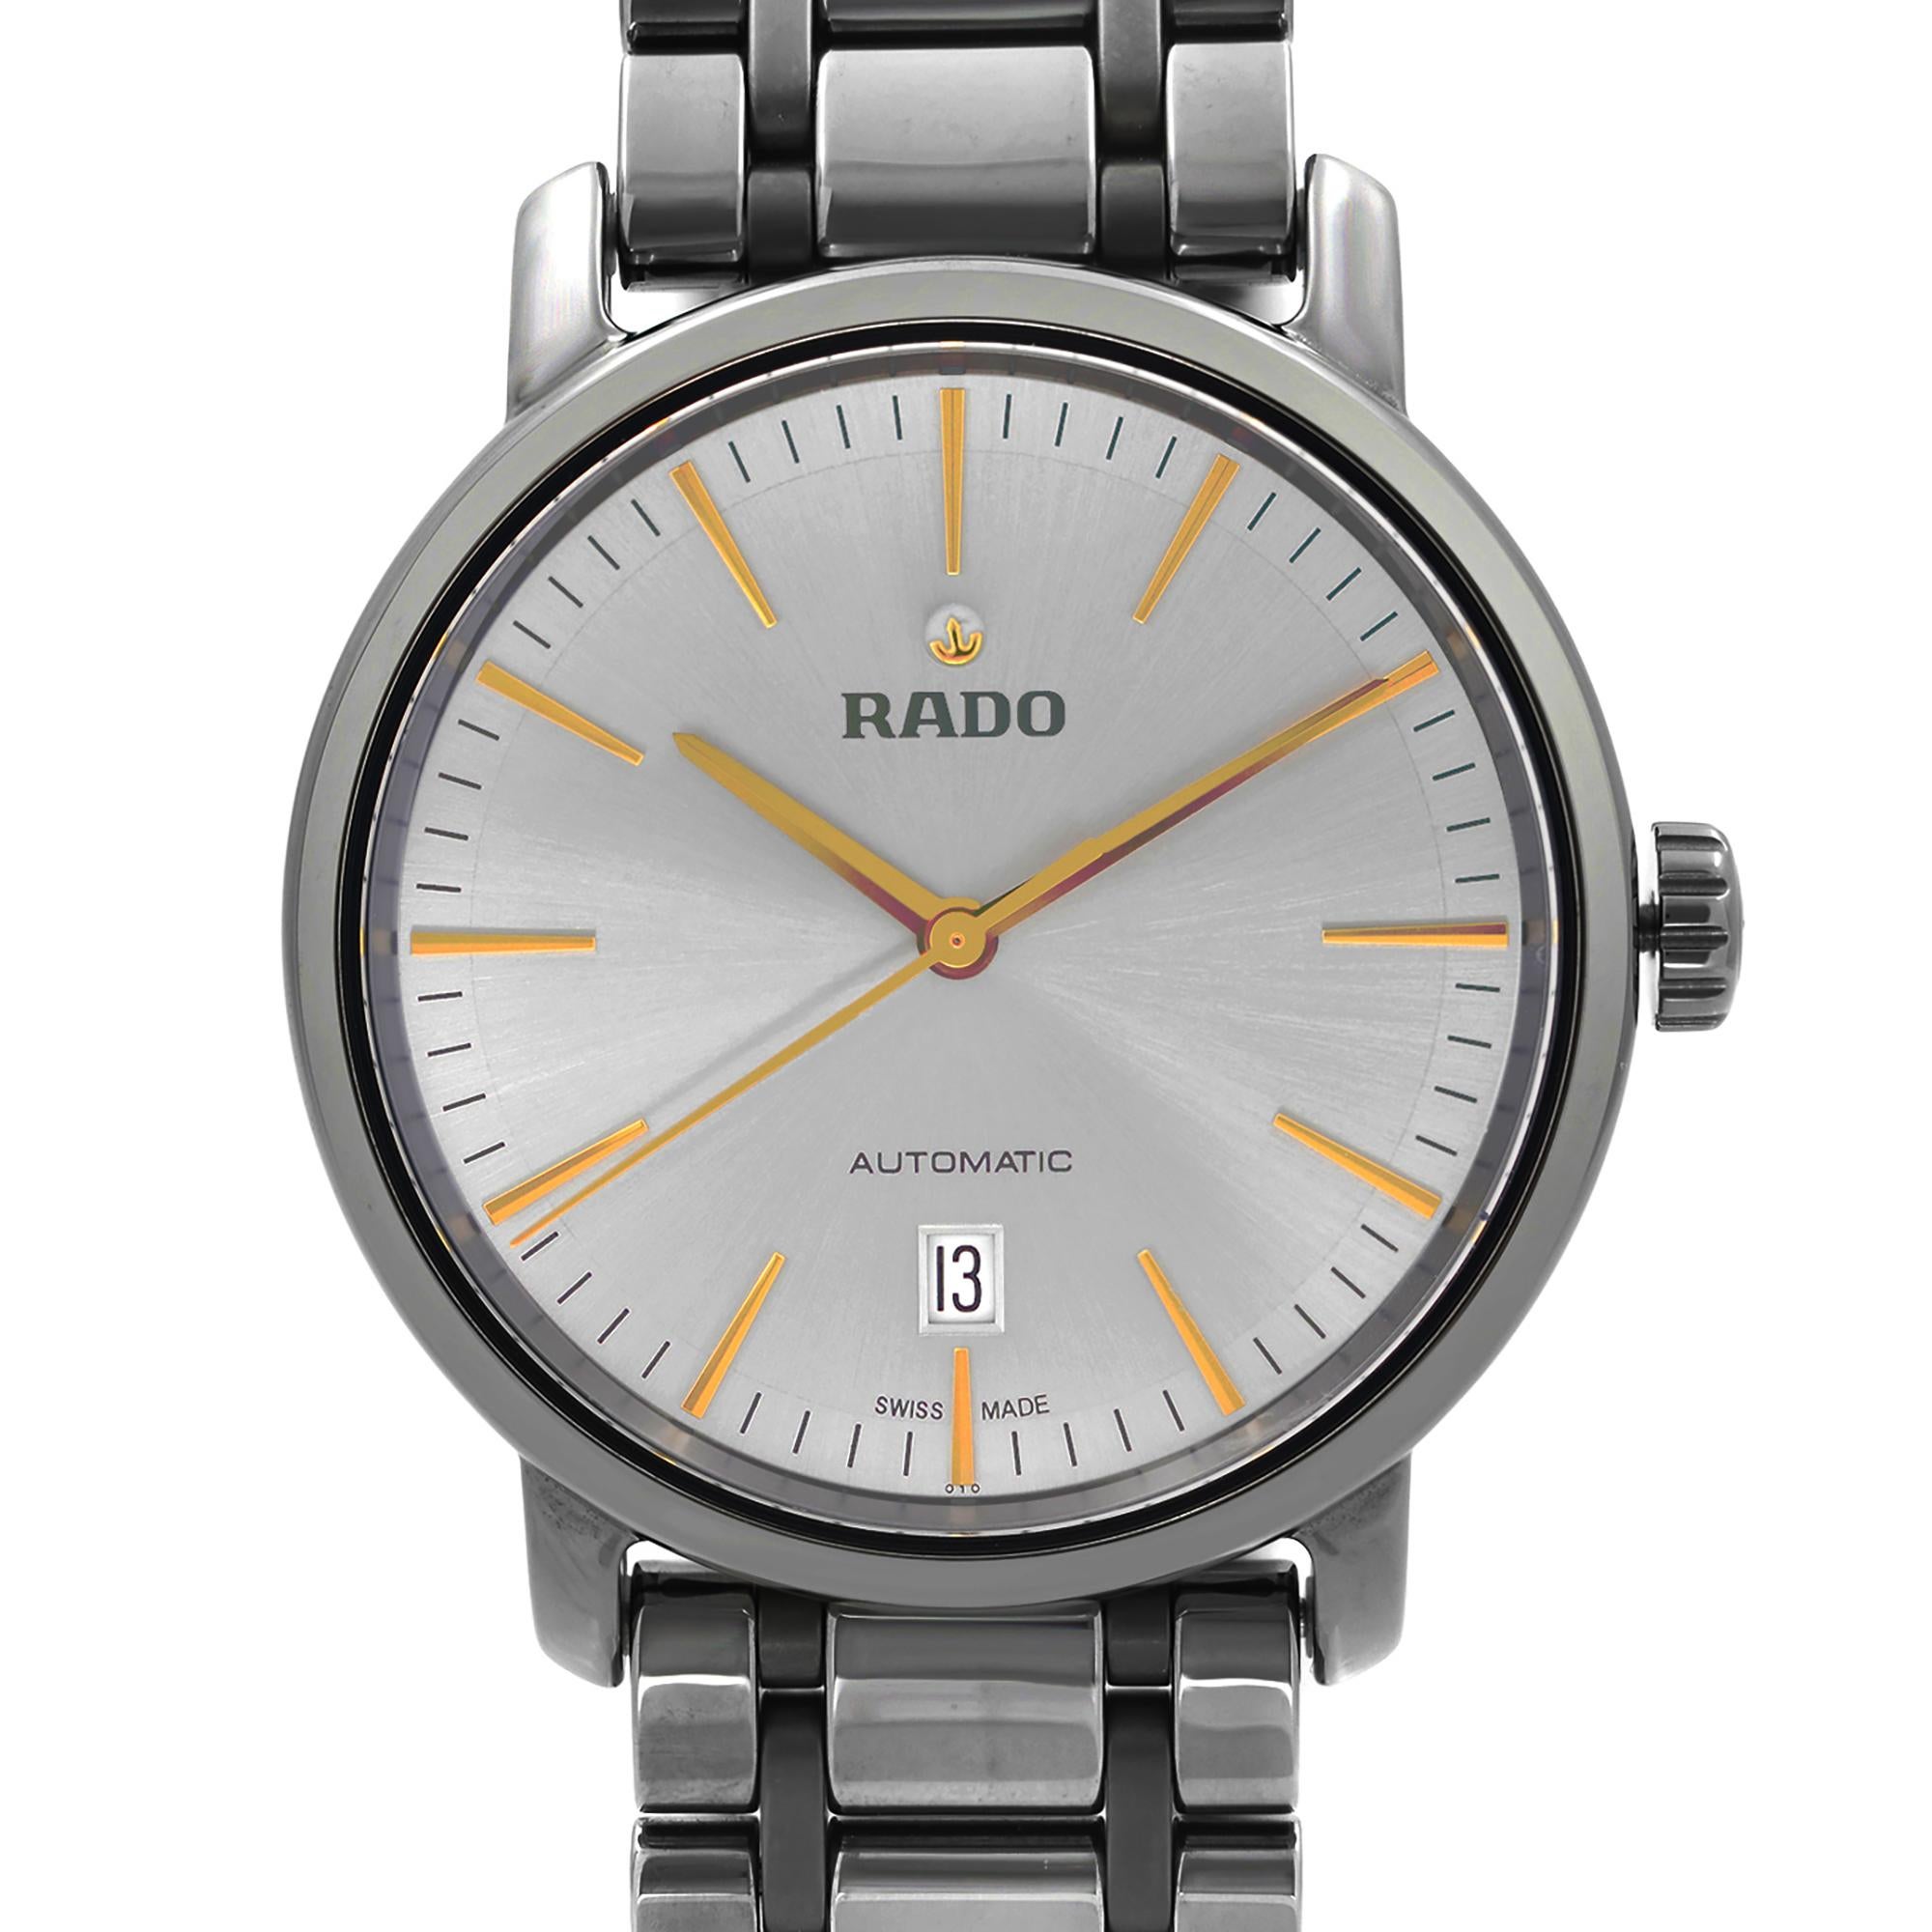 Display Model Rado DiaMaster XL High-Tech Ceramic Silver Dial Automatic Men's Watch R14074102. This Beautiful Timepiece is Powered by Mechanical (Automatic) Movement and Features: High-Tech Ceramic Case & Bracelet. Silver Dial with Rose Gold-Tone